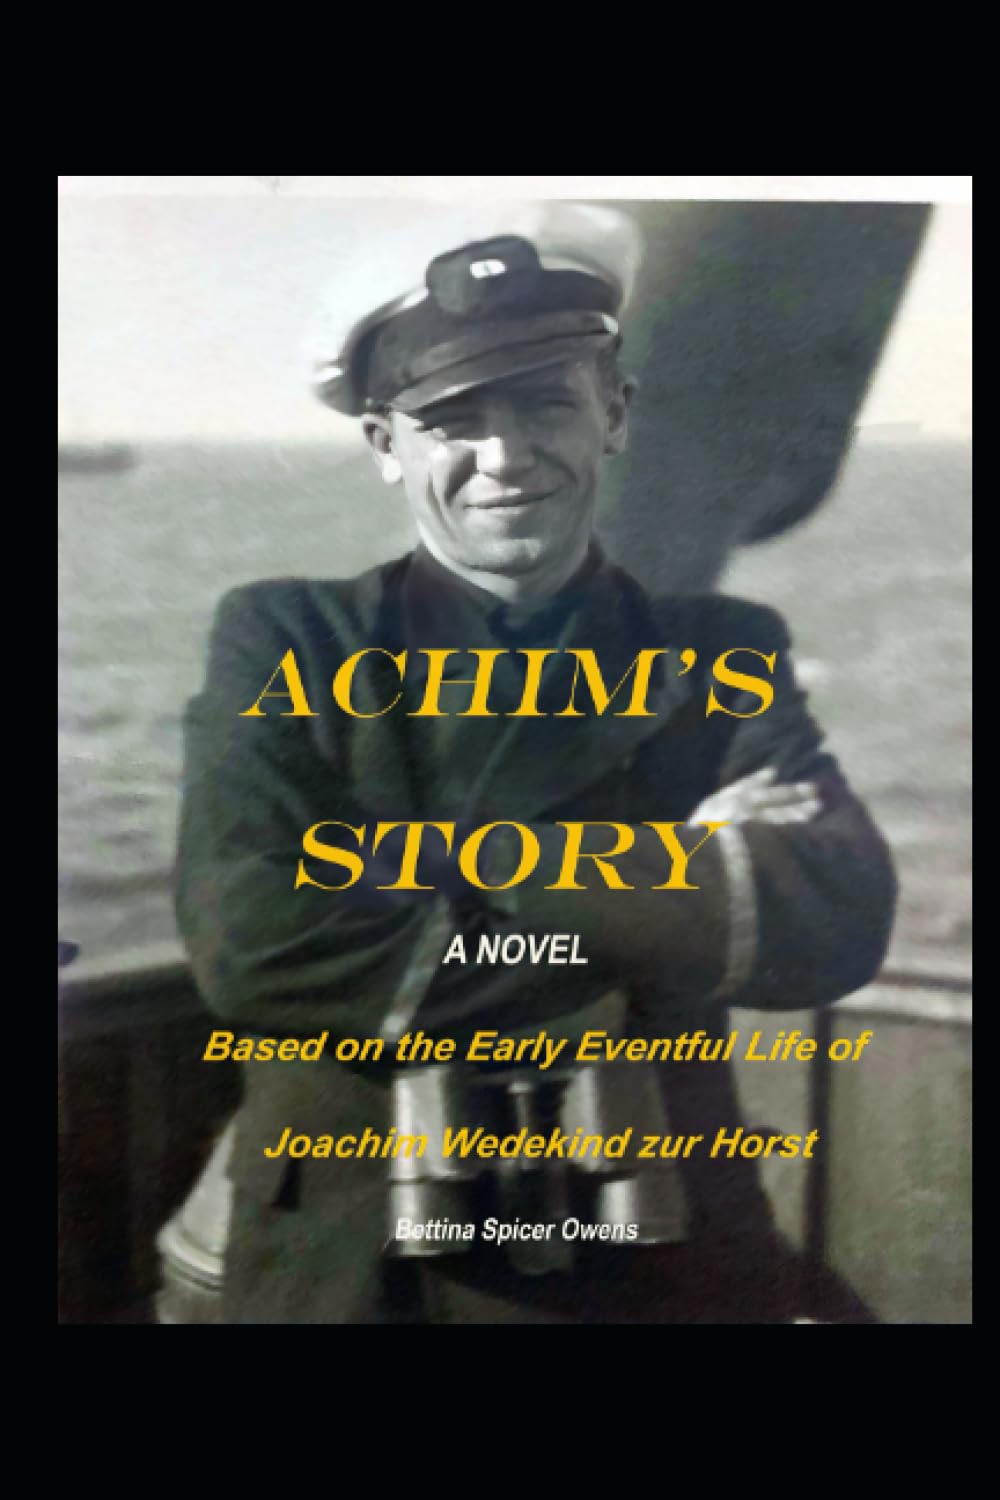 Achim's Story - A Riveting True Historical Fiction of Love, Loss, and Survival Amidst WWII's Perils